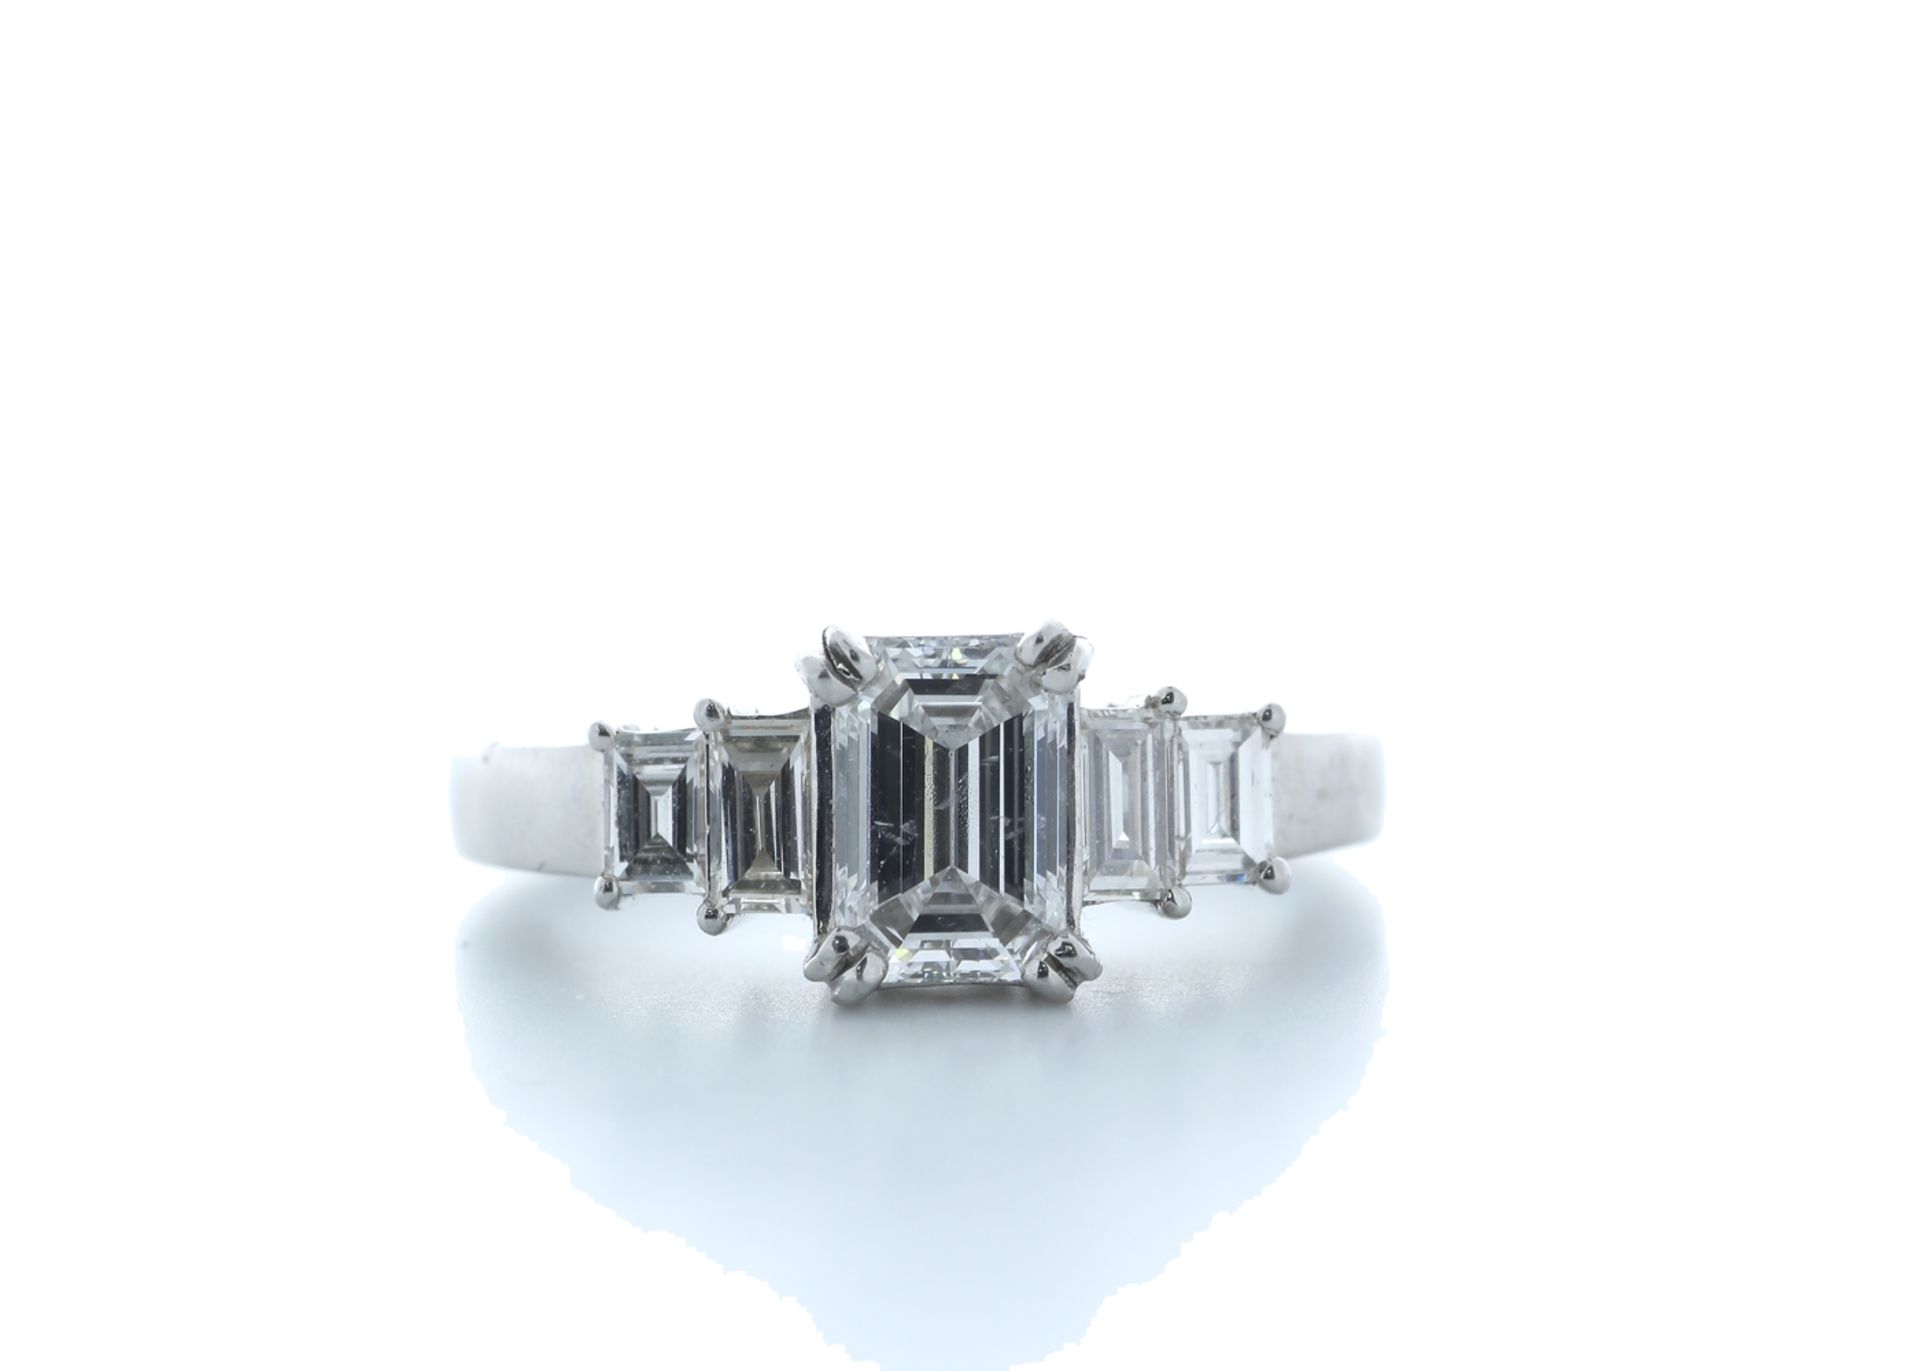 18ct White Gold Emerald Cut Diamond Ring 1.73 (1.23) Carats - Valued by IDI £28,950.00 - 18ct